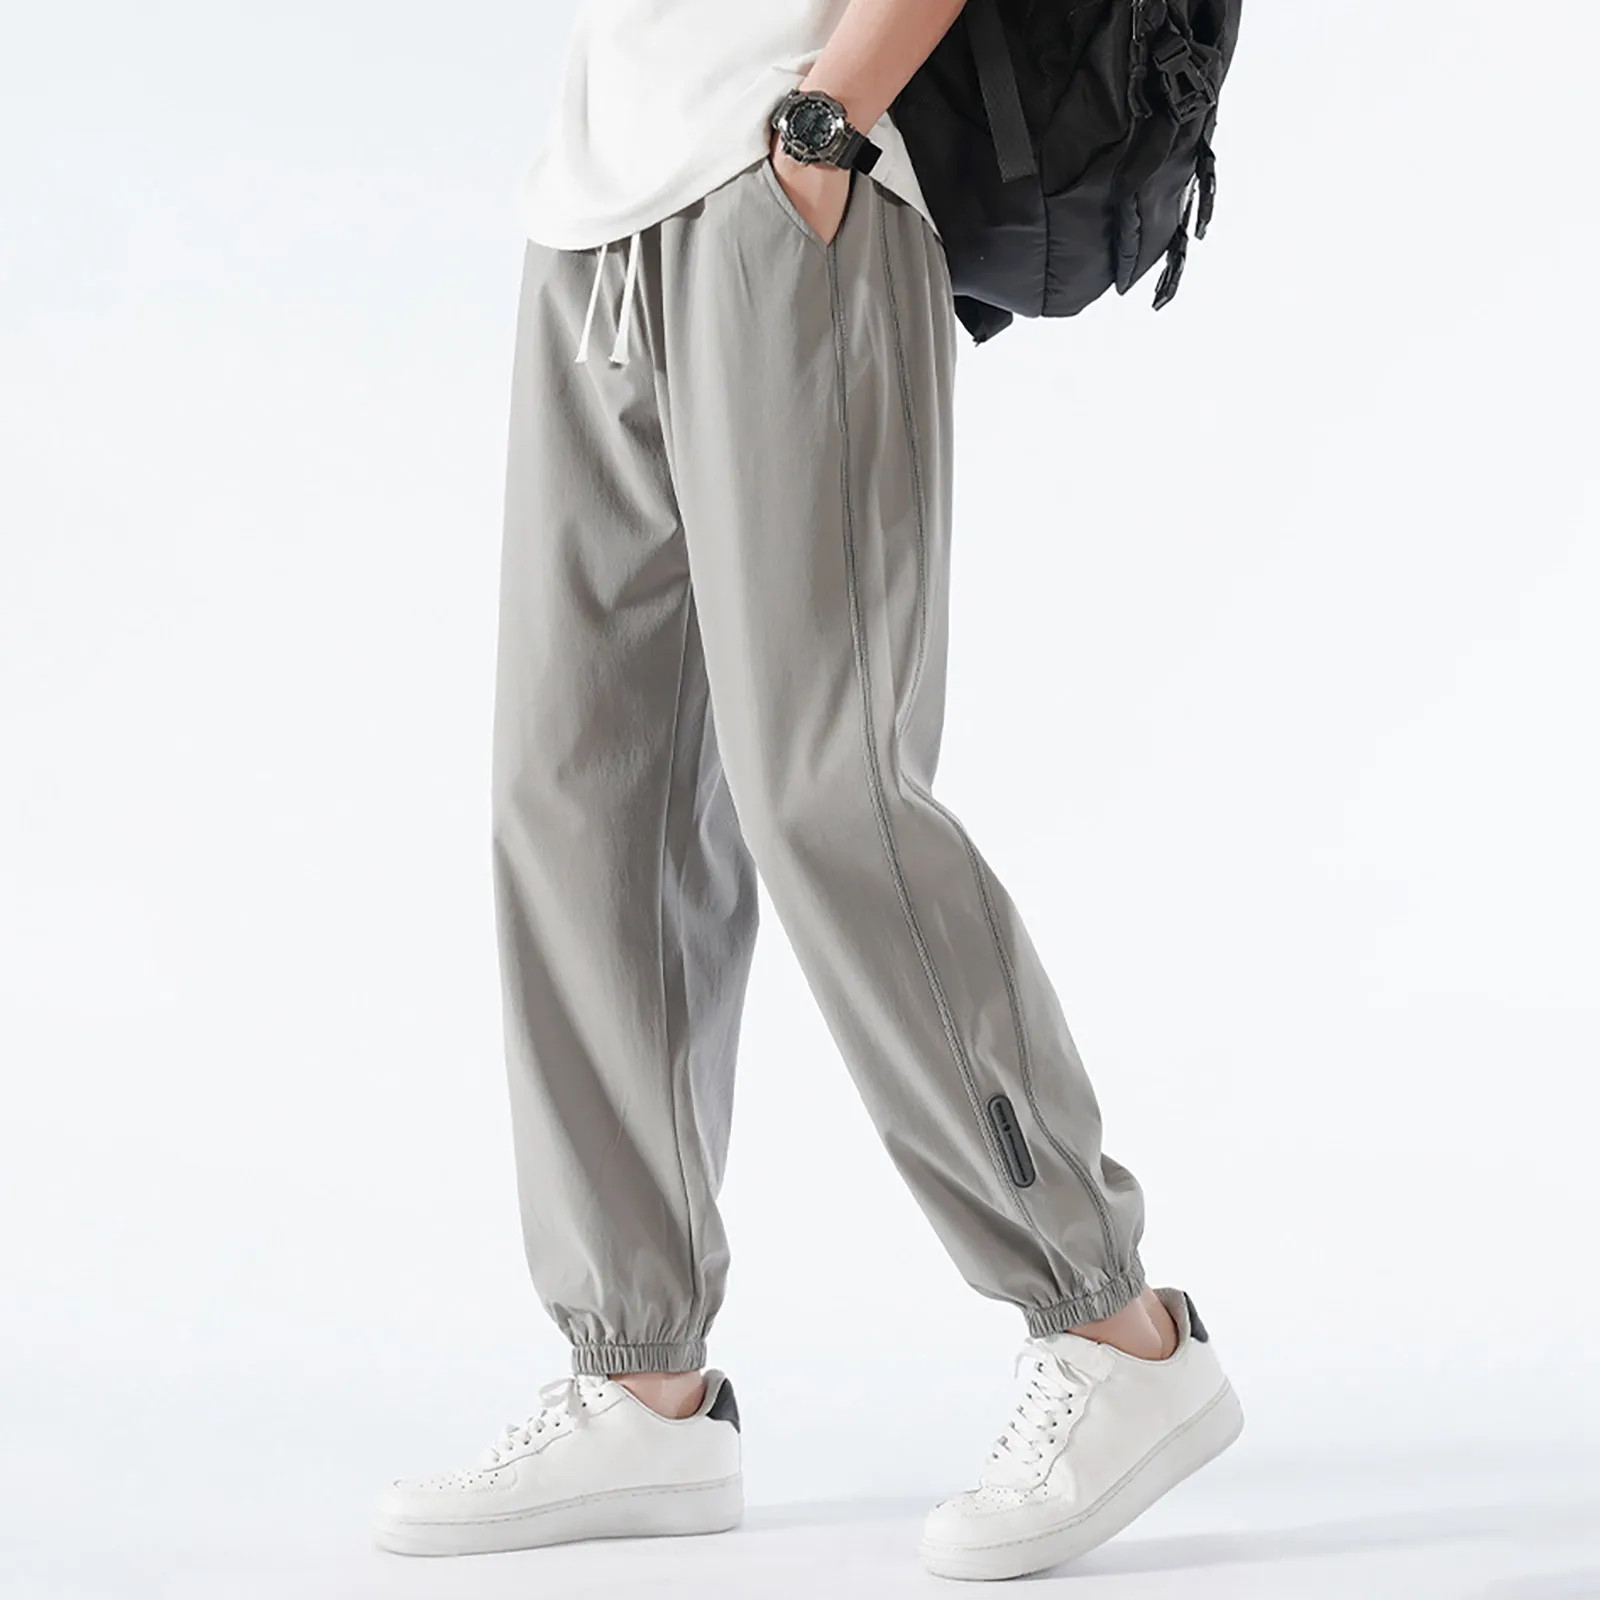 

Comfy fit Ultra Stretch Ice Silk Pants Breathable Straight Casual Unisex Quick Drying sports streetwear pocket Pants trousers